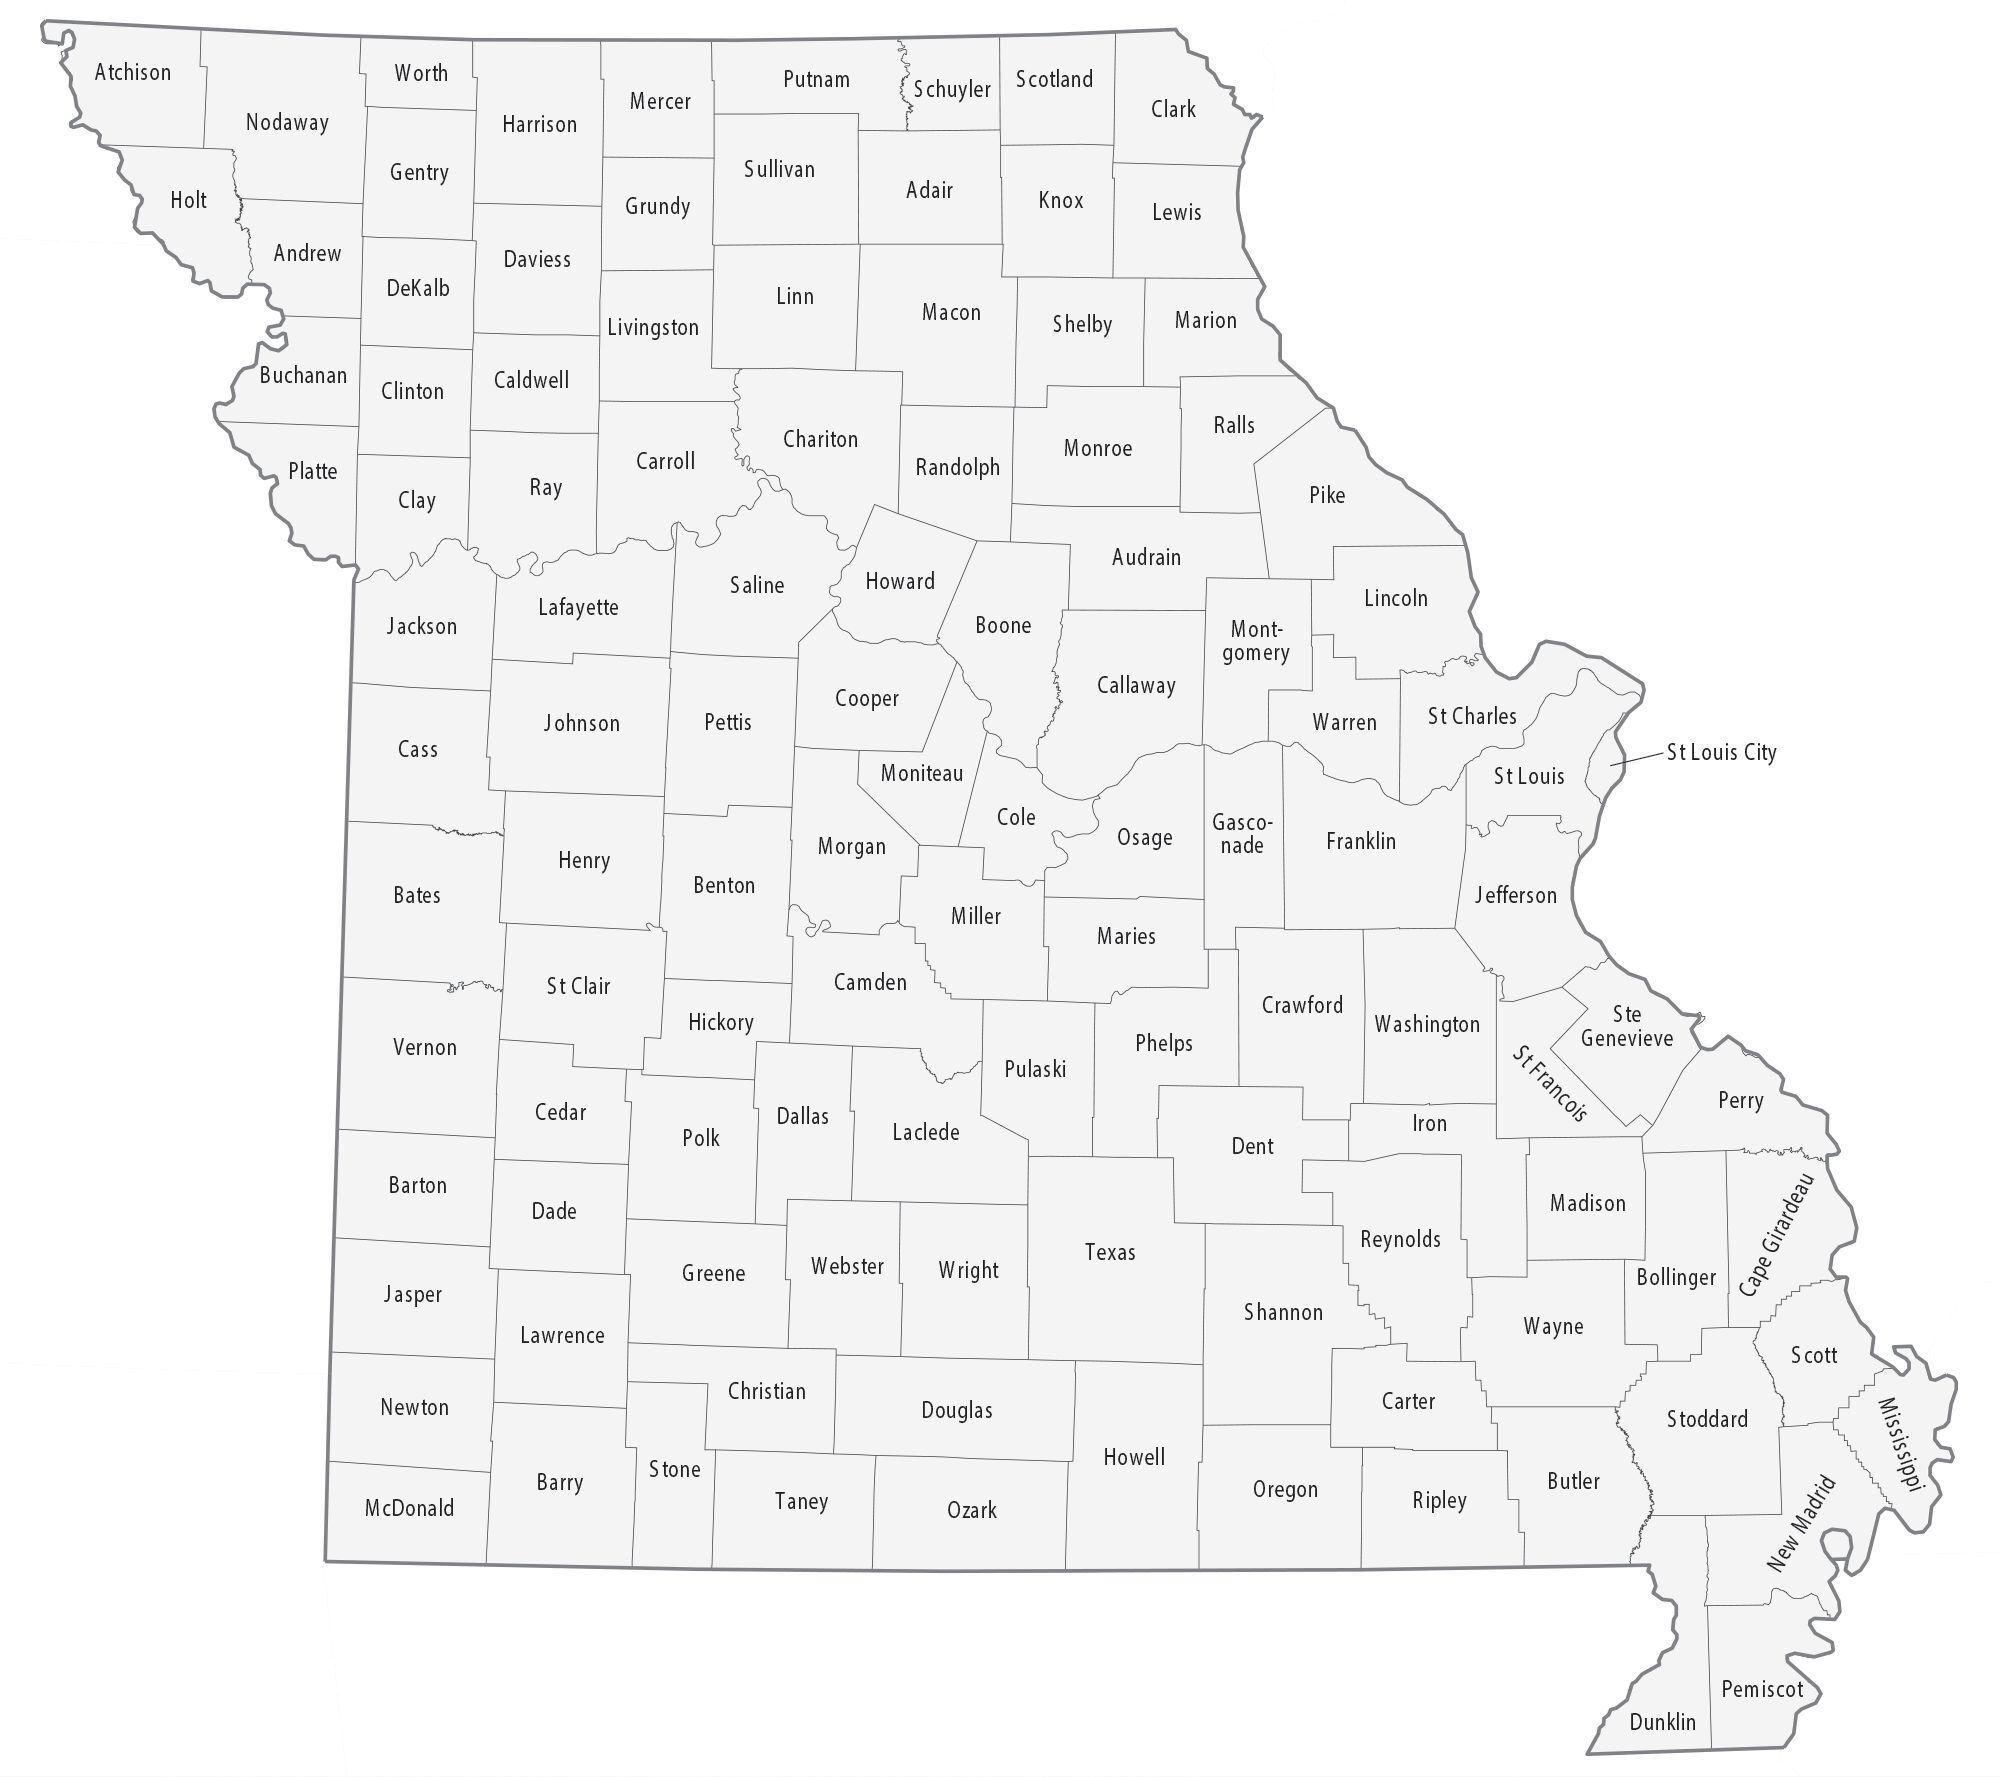 Missouri County Map and Independent City - GIS Geography